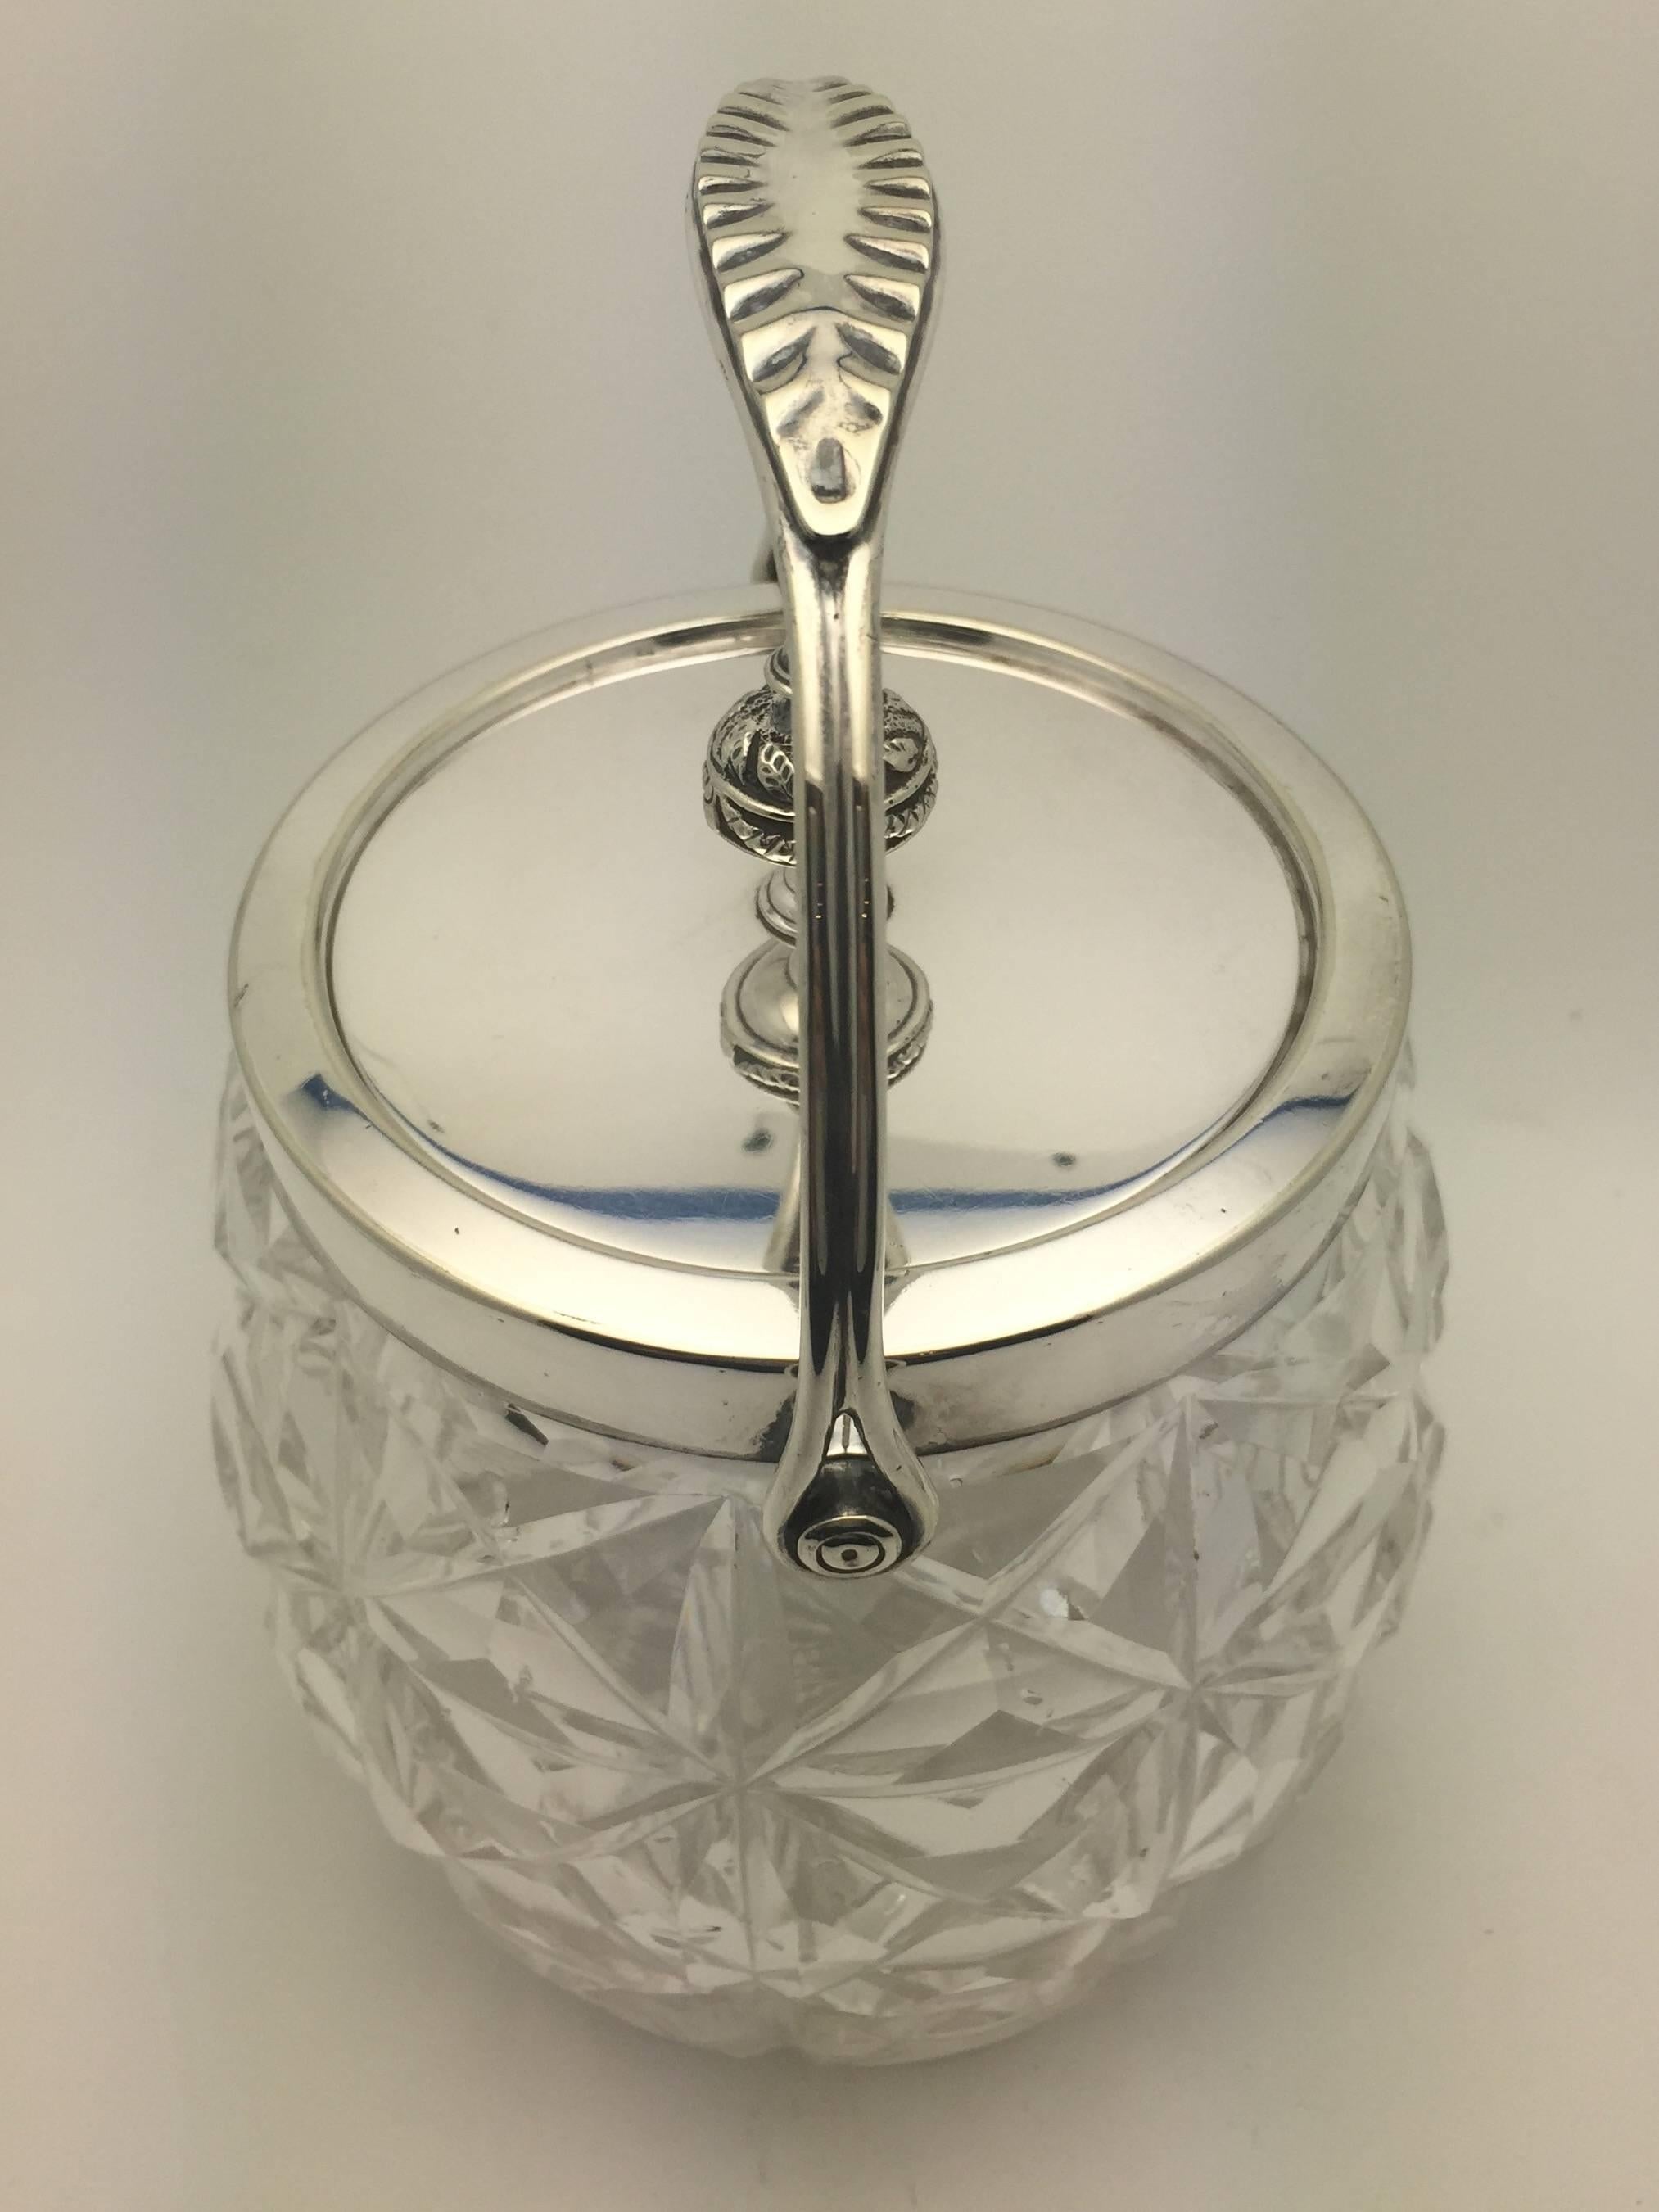 Cut-glass biscuit jar with silver plated mounts and swing handle by William Hutton & Sons.